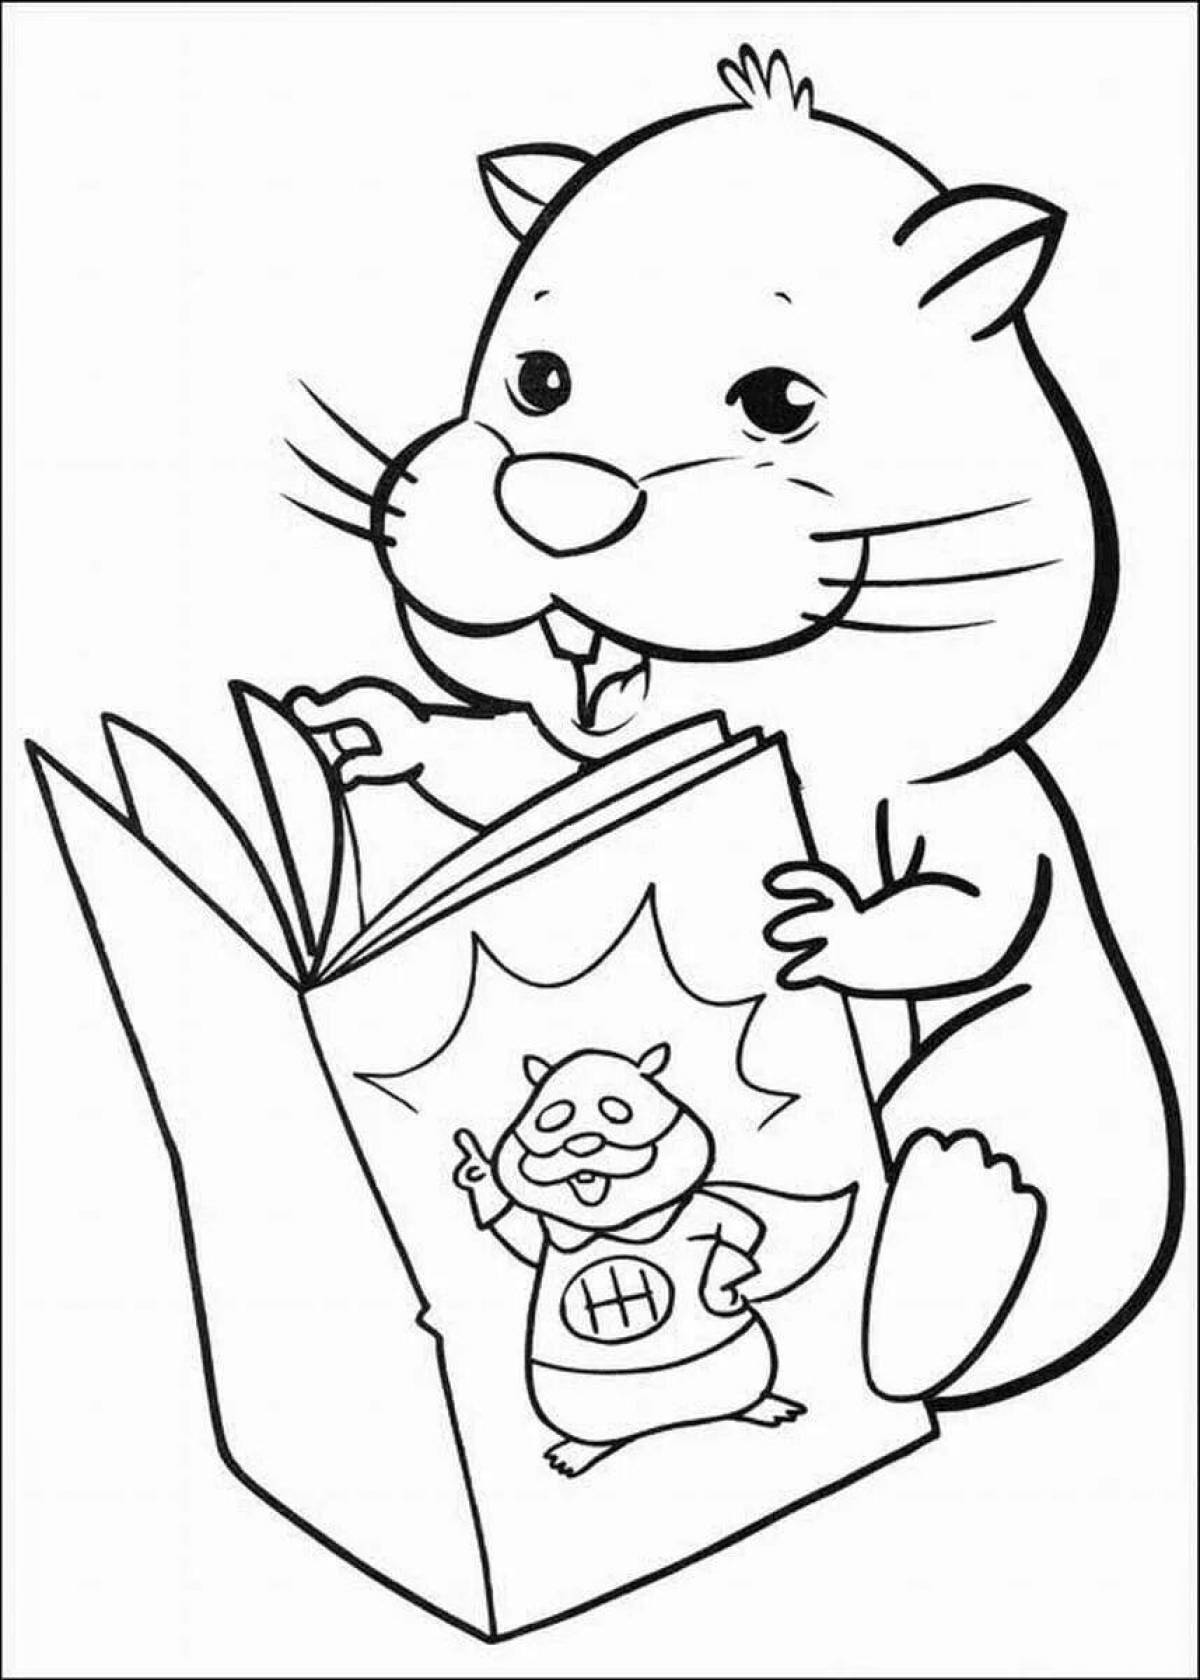 Creative coloring pages for hamsters